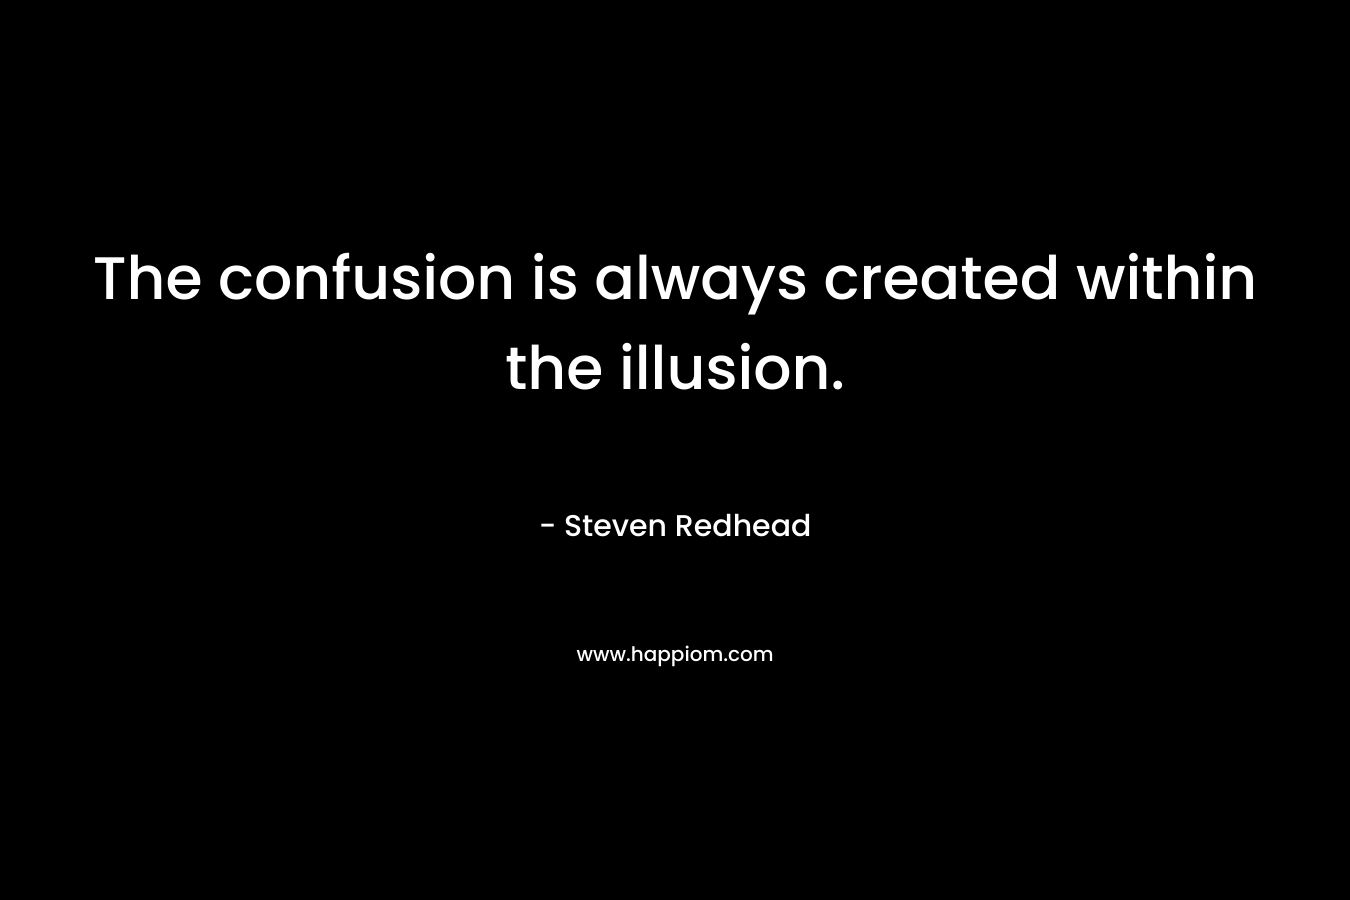 The confusion is always created within the illusion.